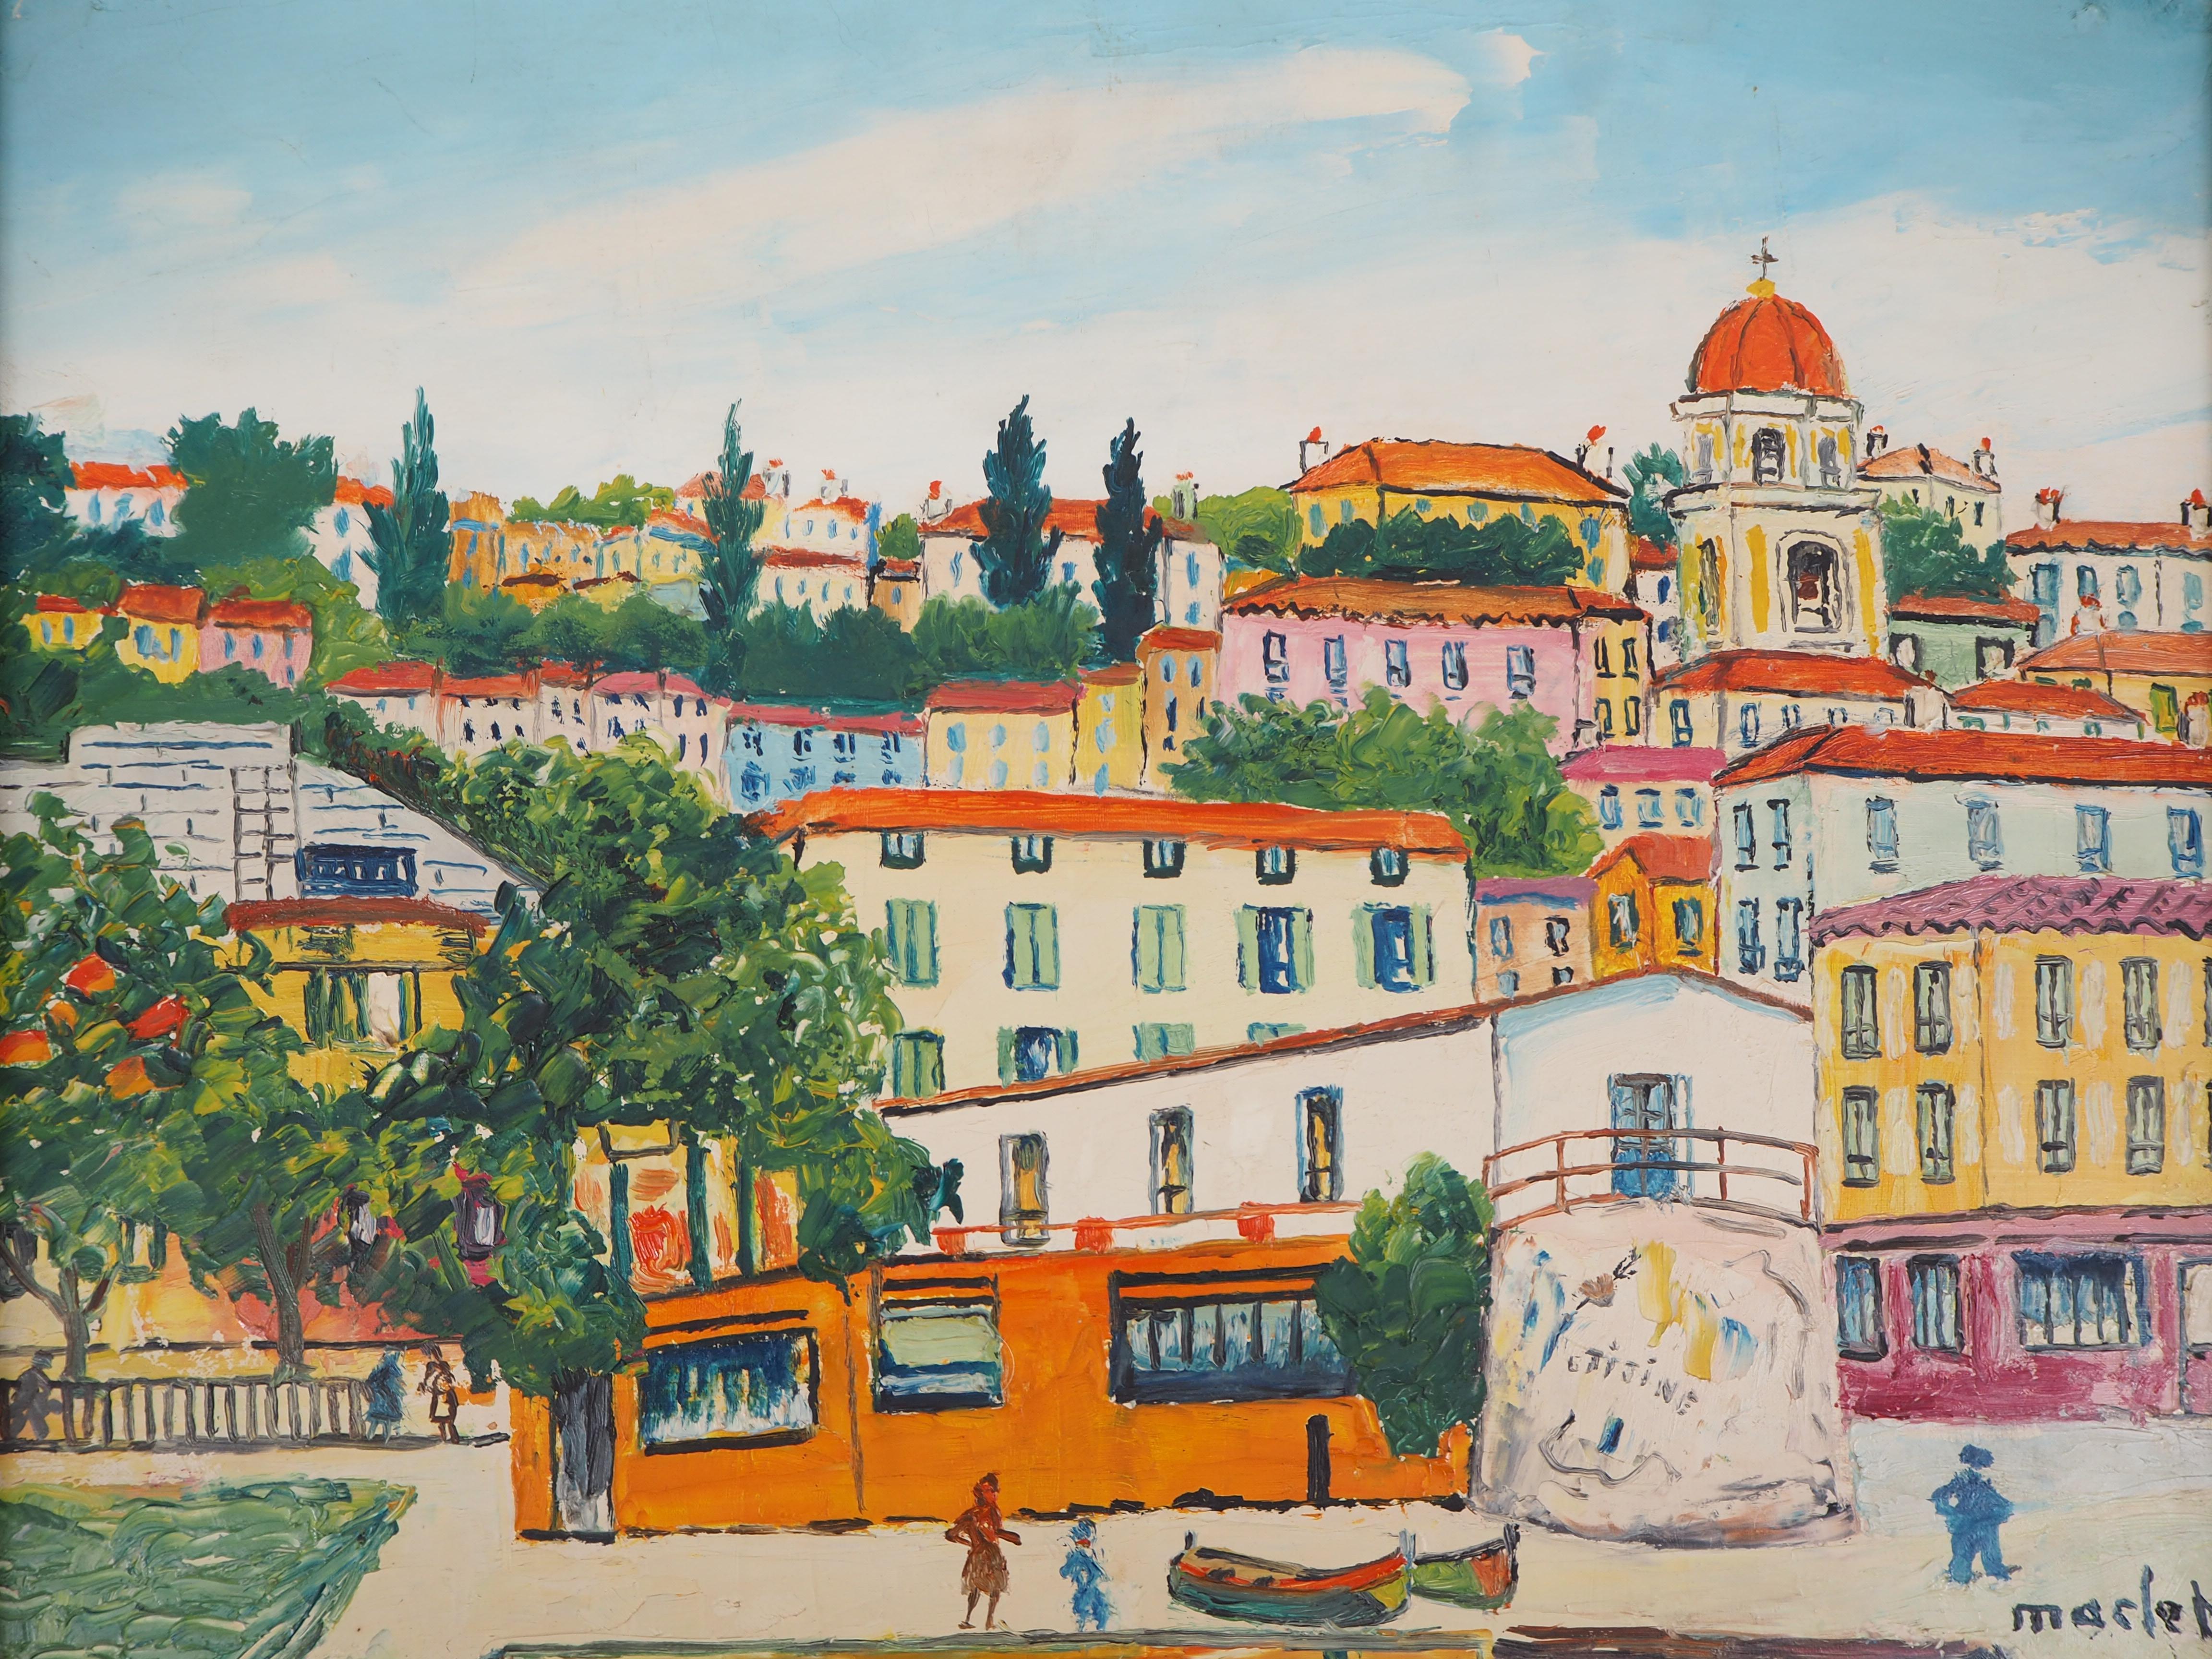 Elisee MACLET
French Riviera : Villefranche sur Mer

Original oil on canvas
Handsigned right middle
On canvas 55 x 46 cm (c. 22 x 18 inch)
Presented in a golden wood frame 71 x 61 cm (c. 28 x 24 inch)

Very good condition, light surface defects in